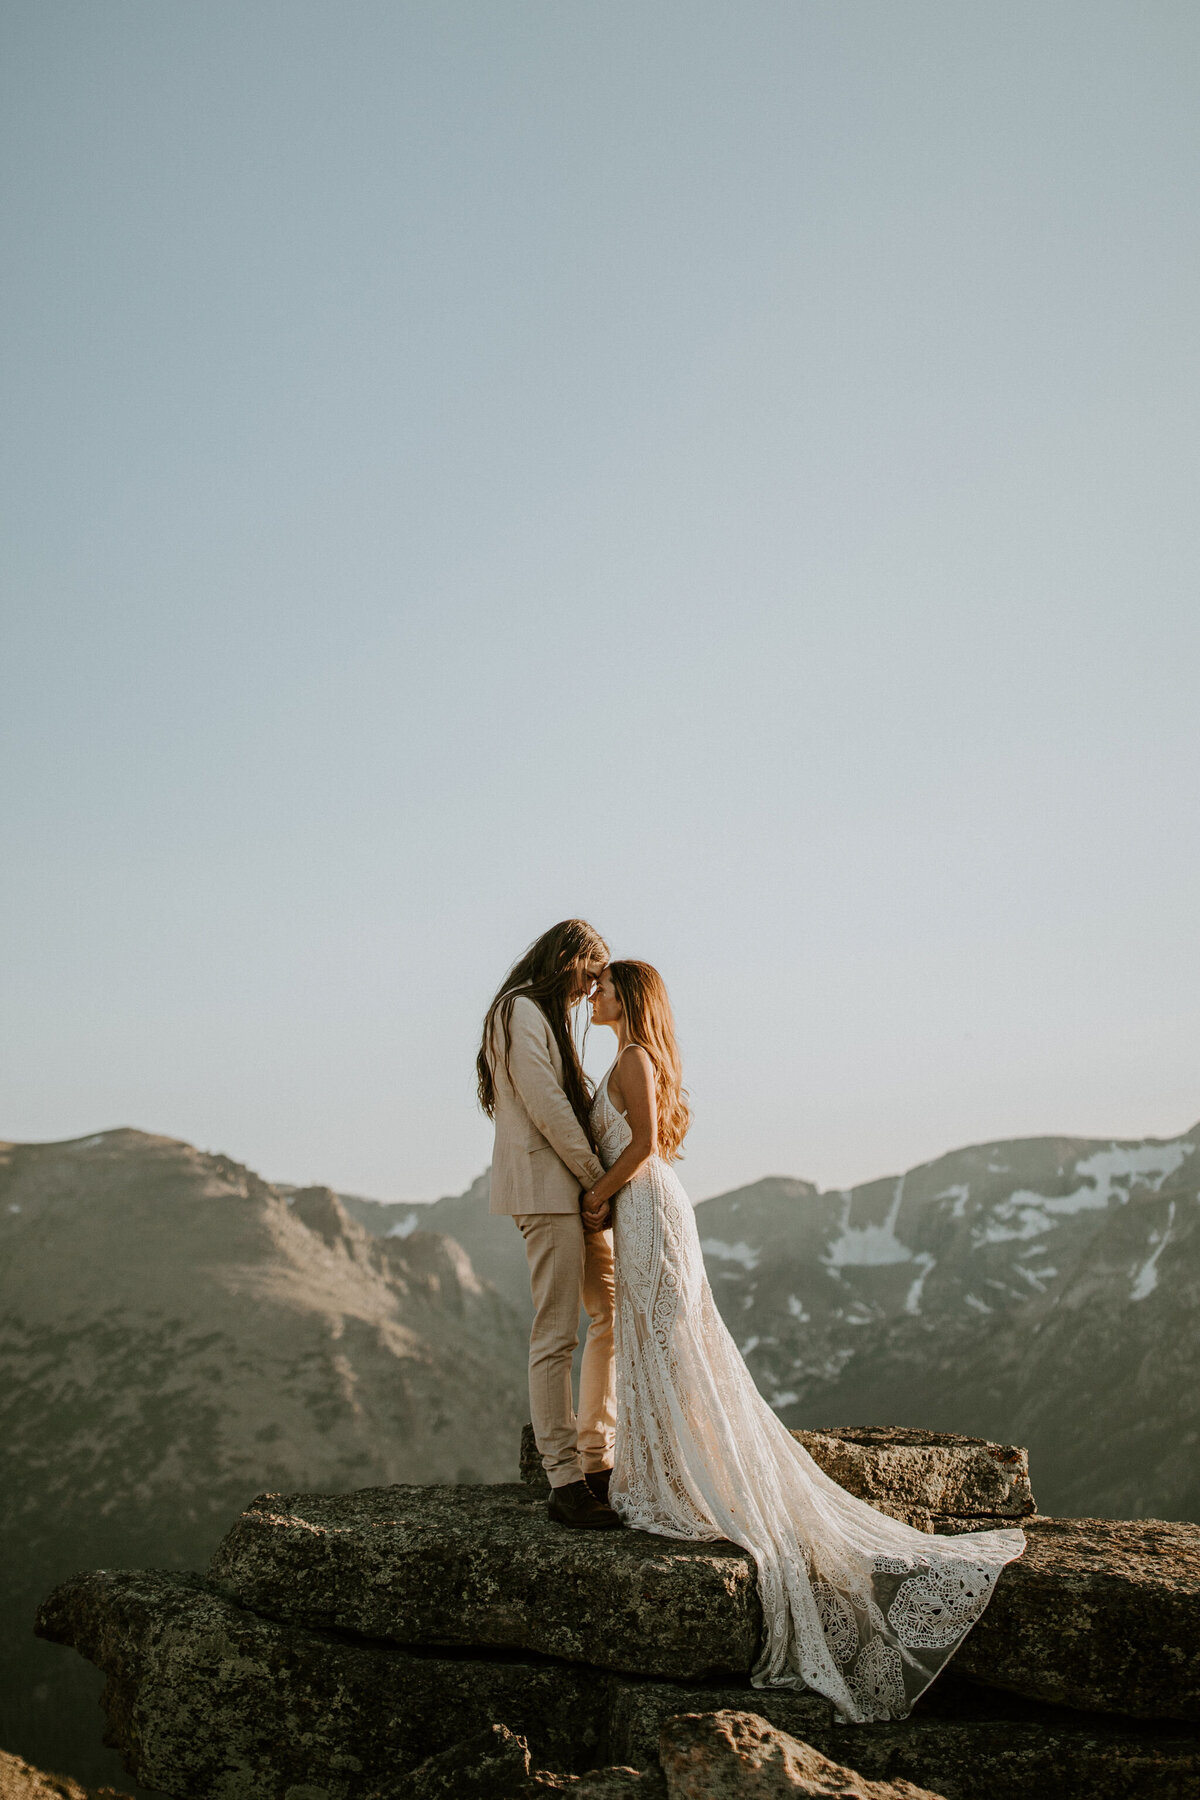 Bride and groom wearing an ivory suit and white wedding gown holding each other atop a stone in the mountains.